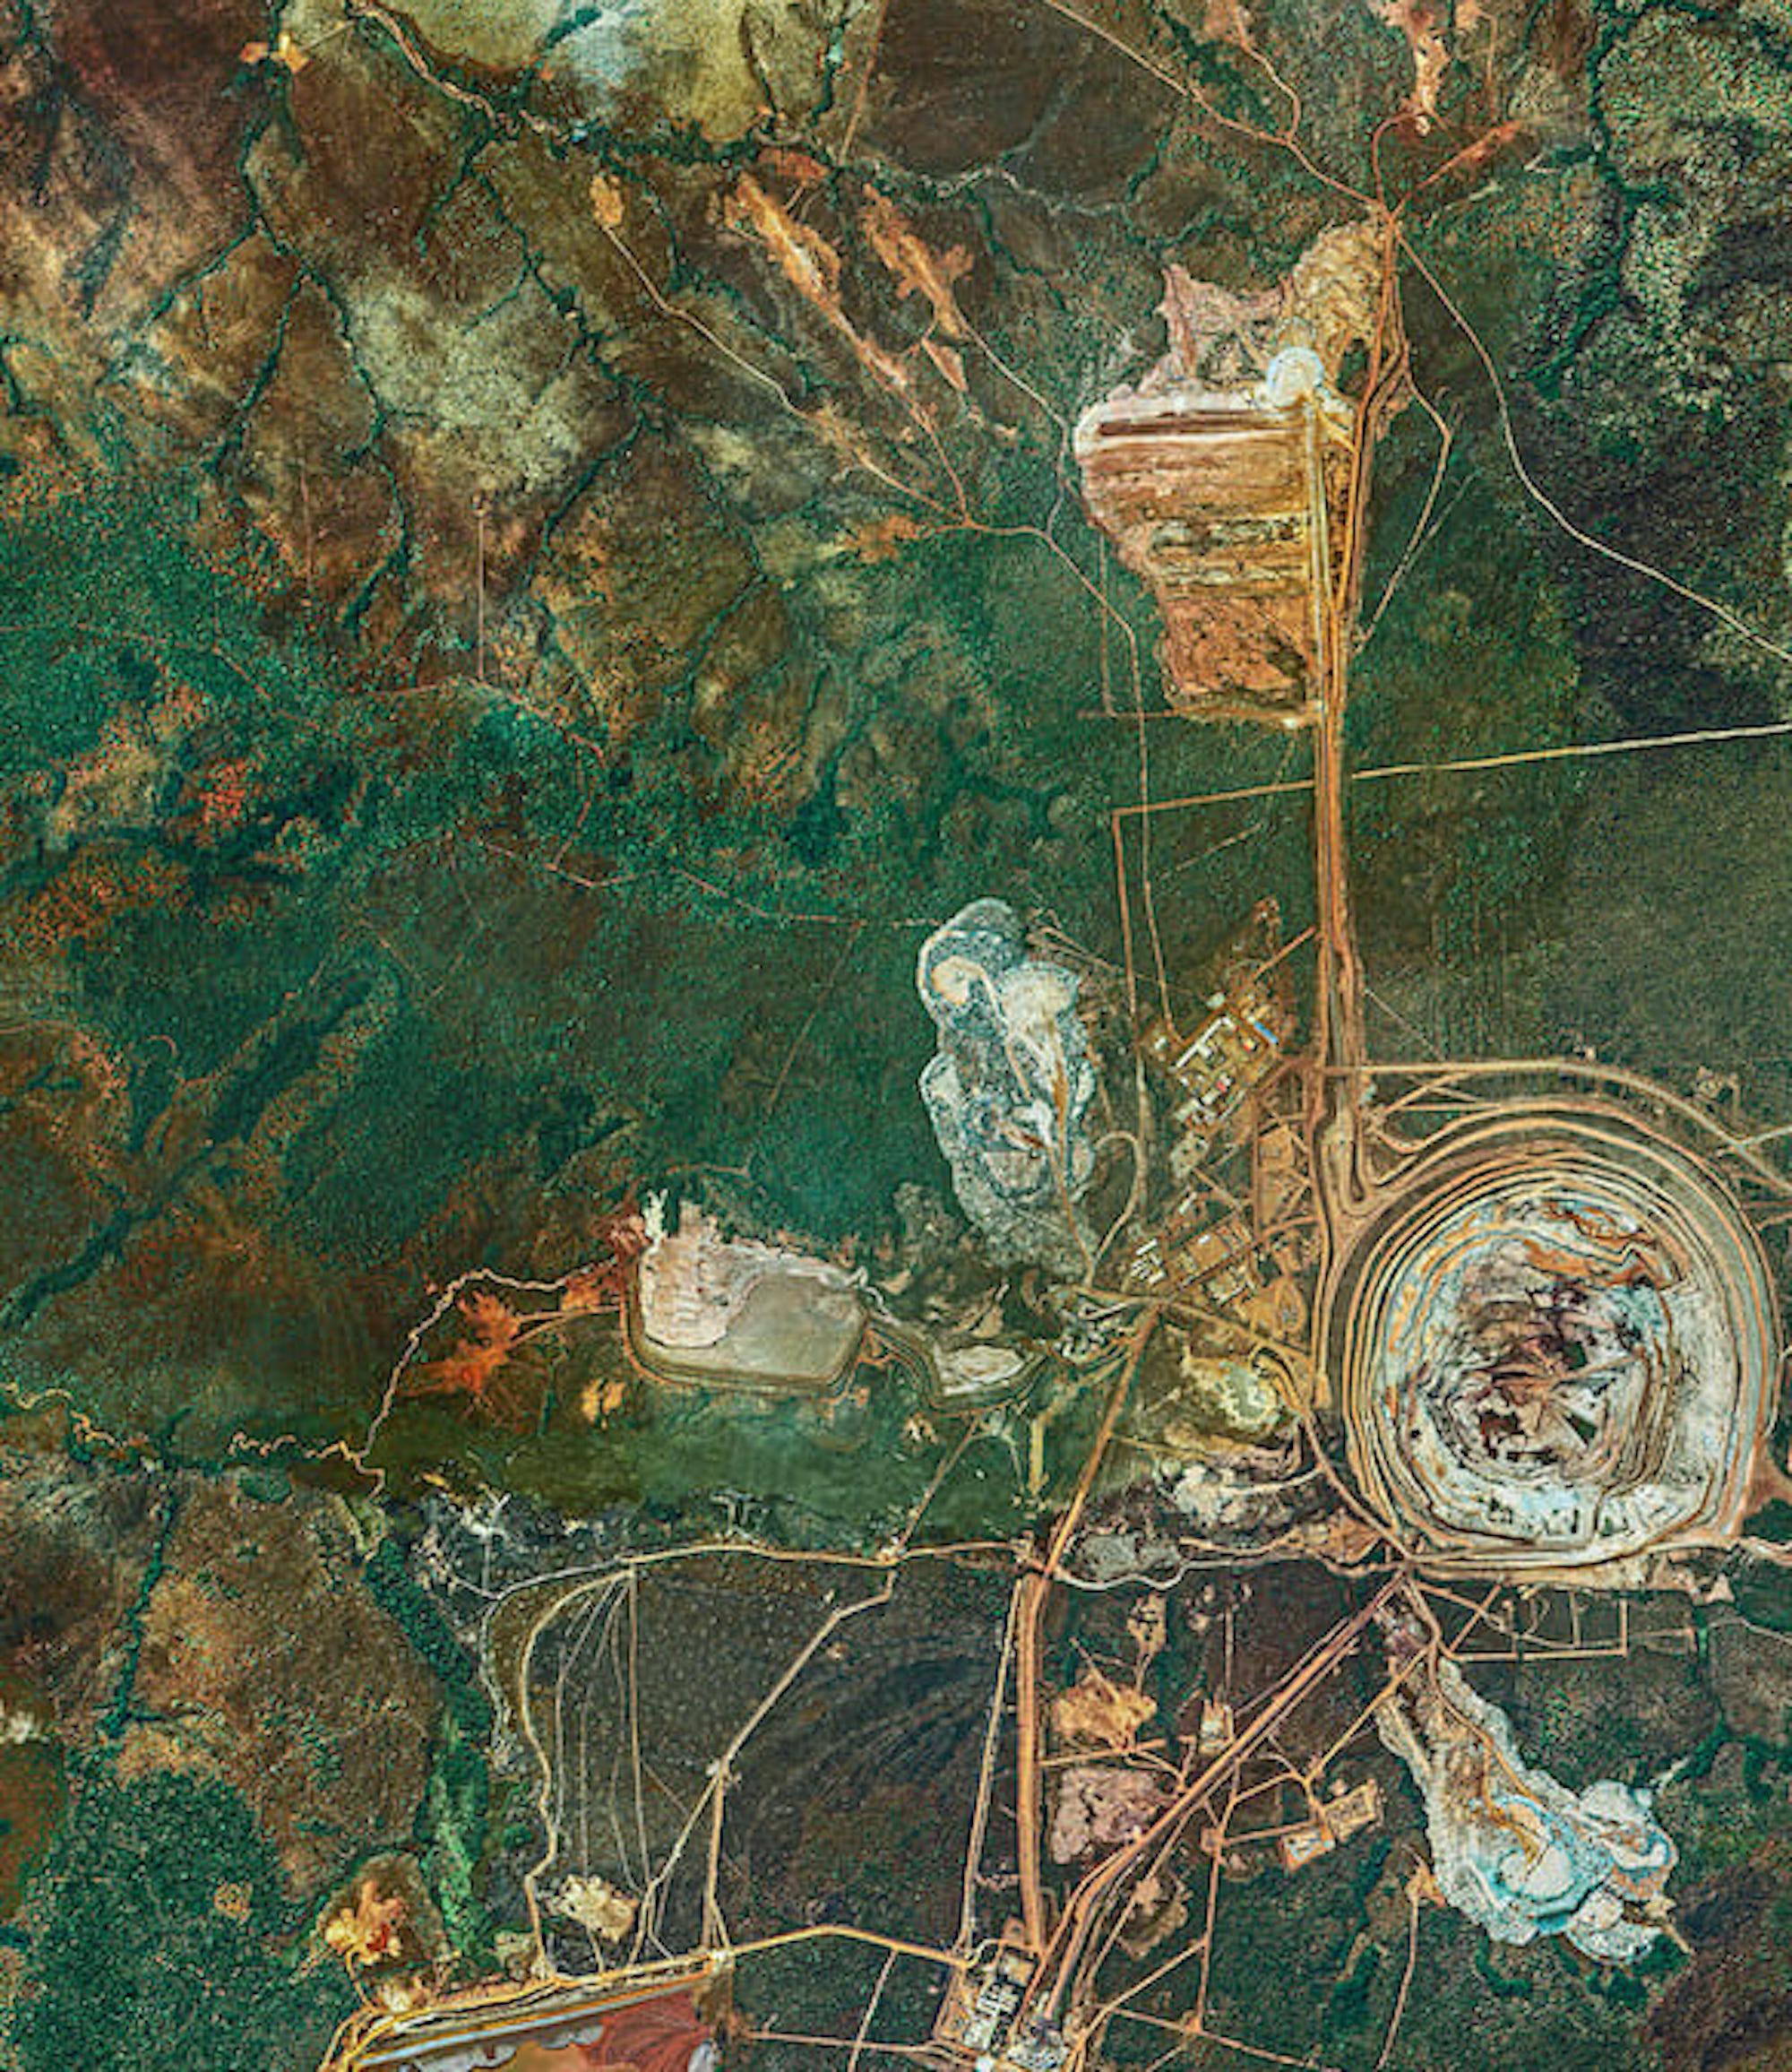 African Mines 007 by Bernhard Lang - Aerial abstract photography, environment For Sale 3